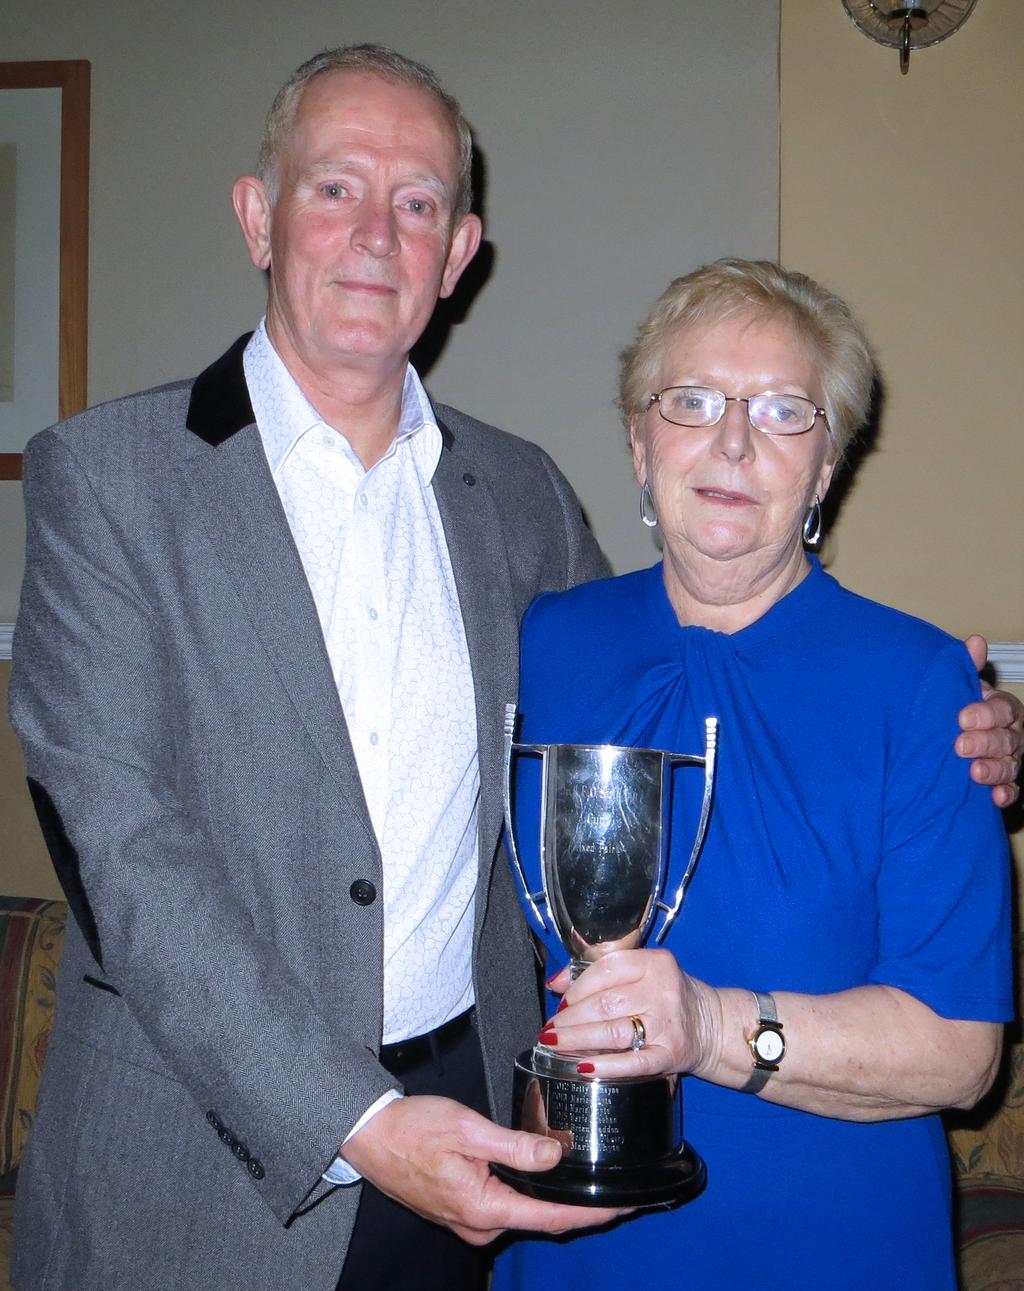 COLLINS BRIDGE CLUB S PLAYER OF THE YEAR Brig Gen Patrick Flynn, GOC First Brigade and President of Collins Bridge Club, presents the Player of the Year award to Mrs Marie Whyte.